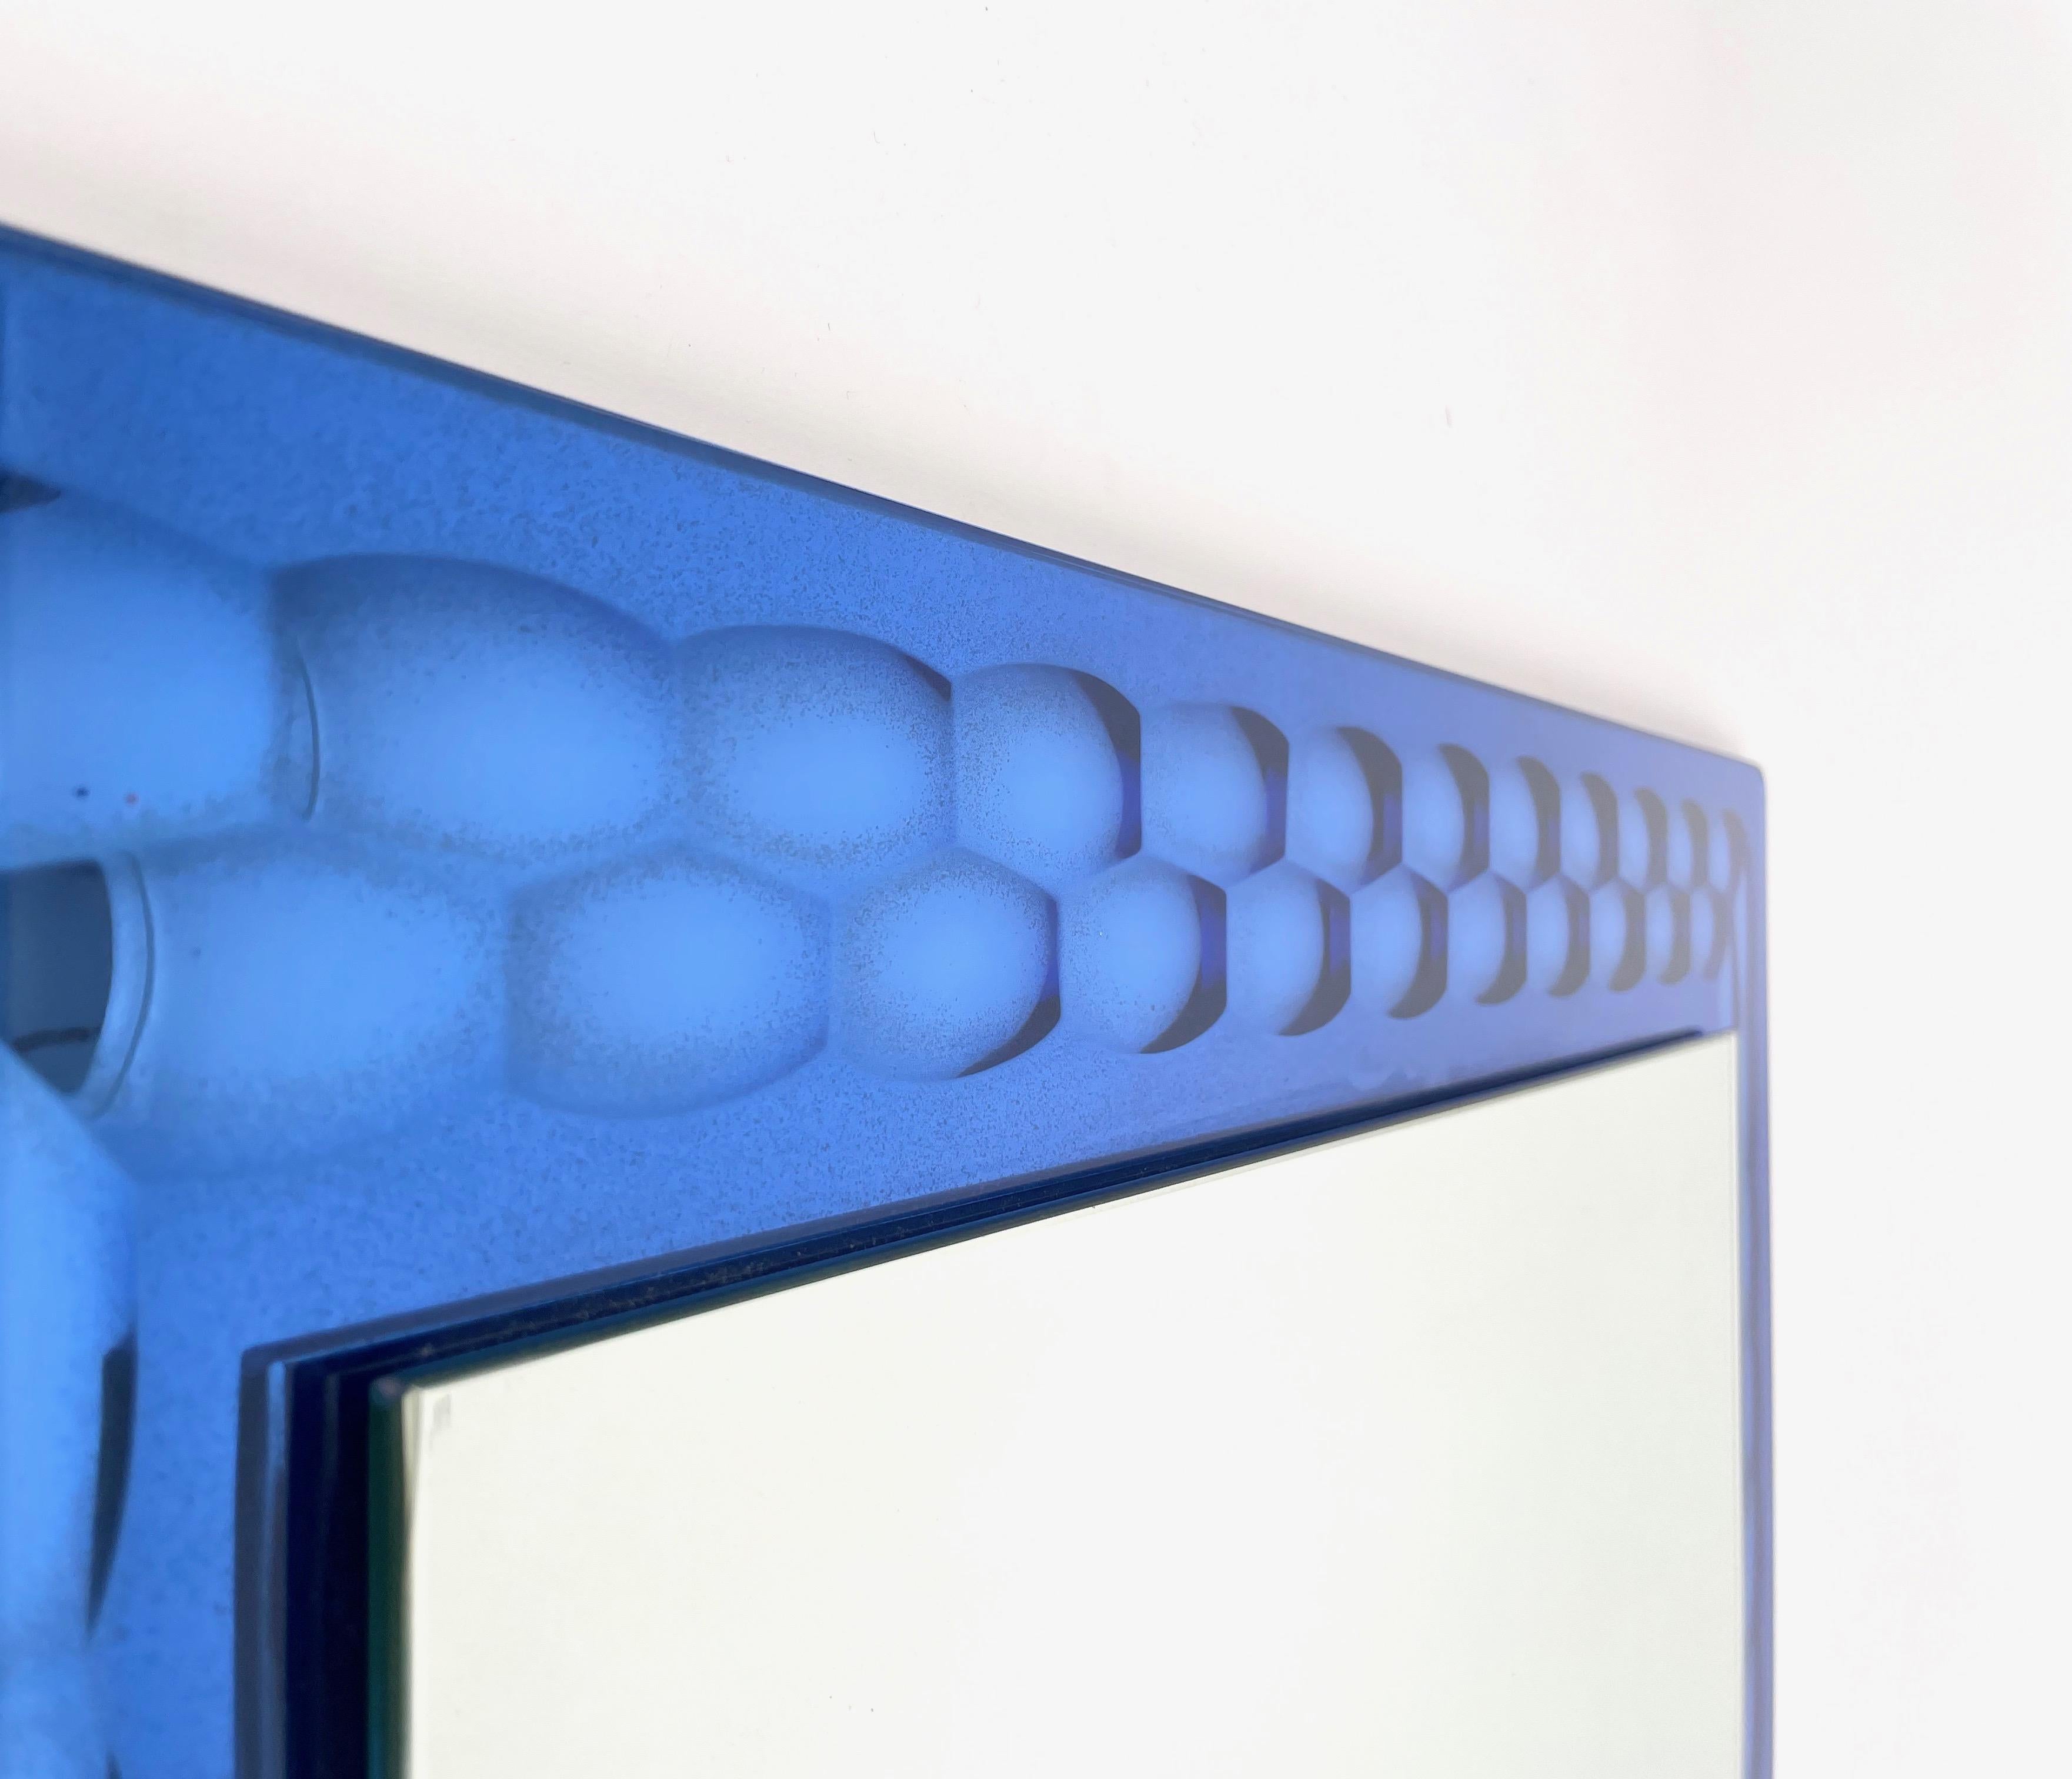 Squared Blue Wall Mirror by Lupi Cristal Luxor, Italy, 1960s For Sale 2